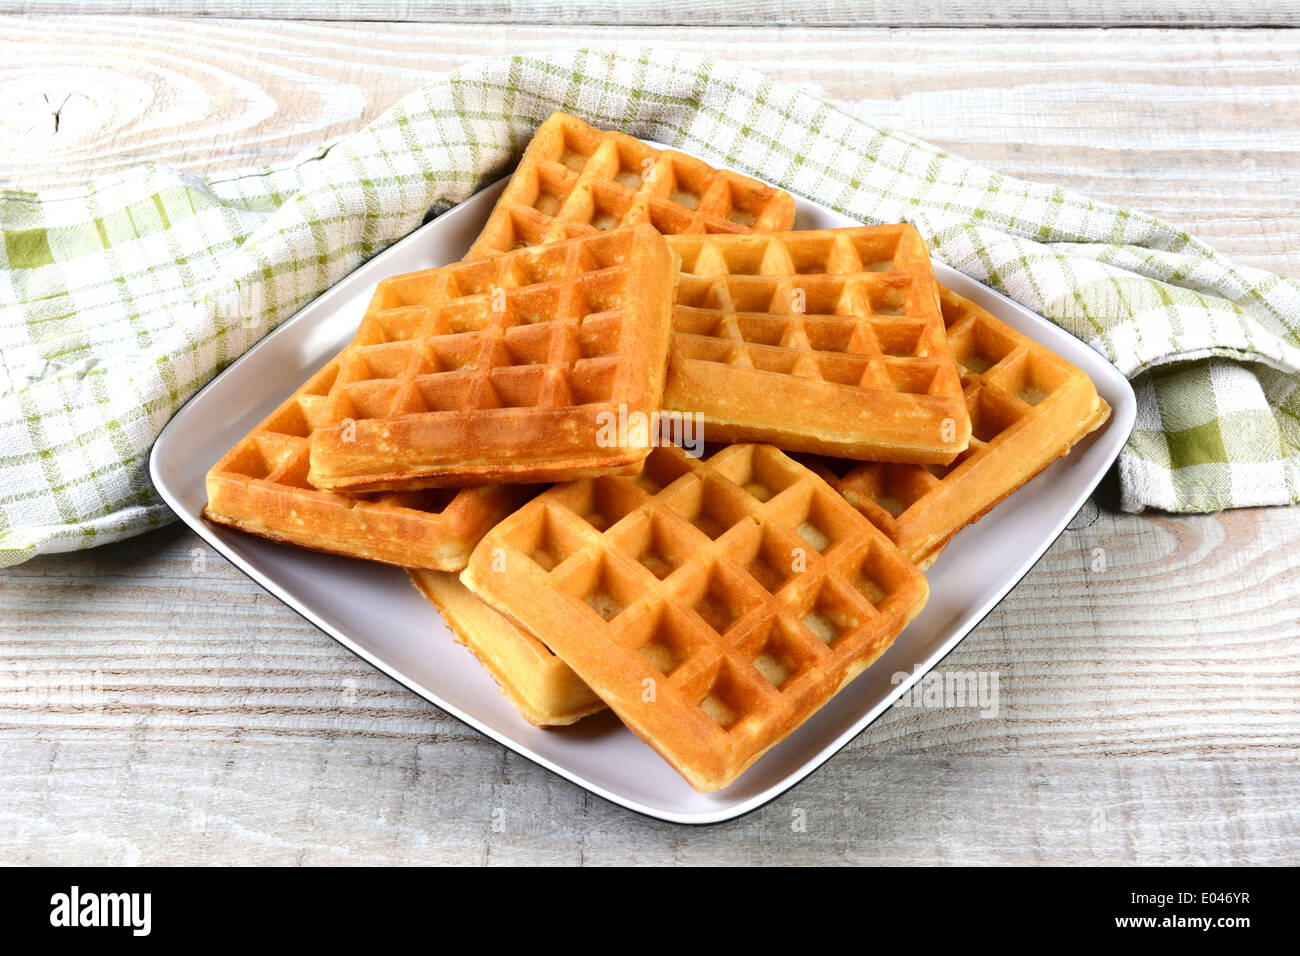 A plate of fresh made waffles on a rustic farmhouse style table. Stock Photo